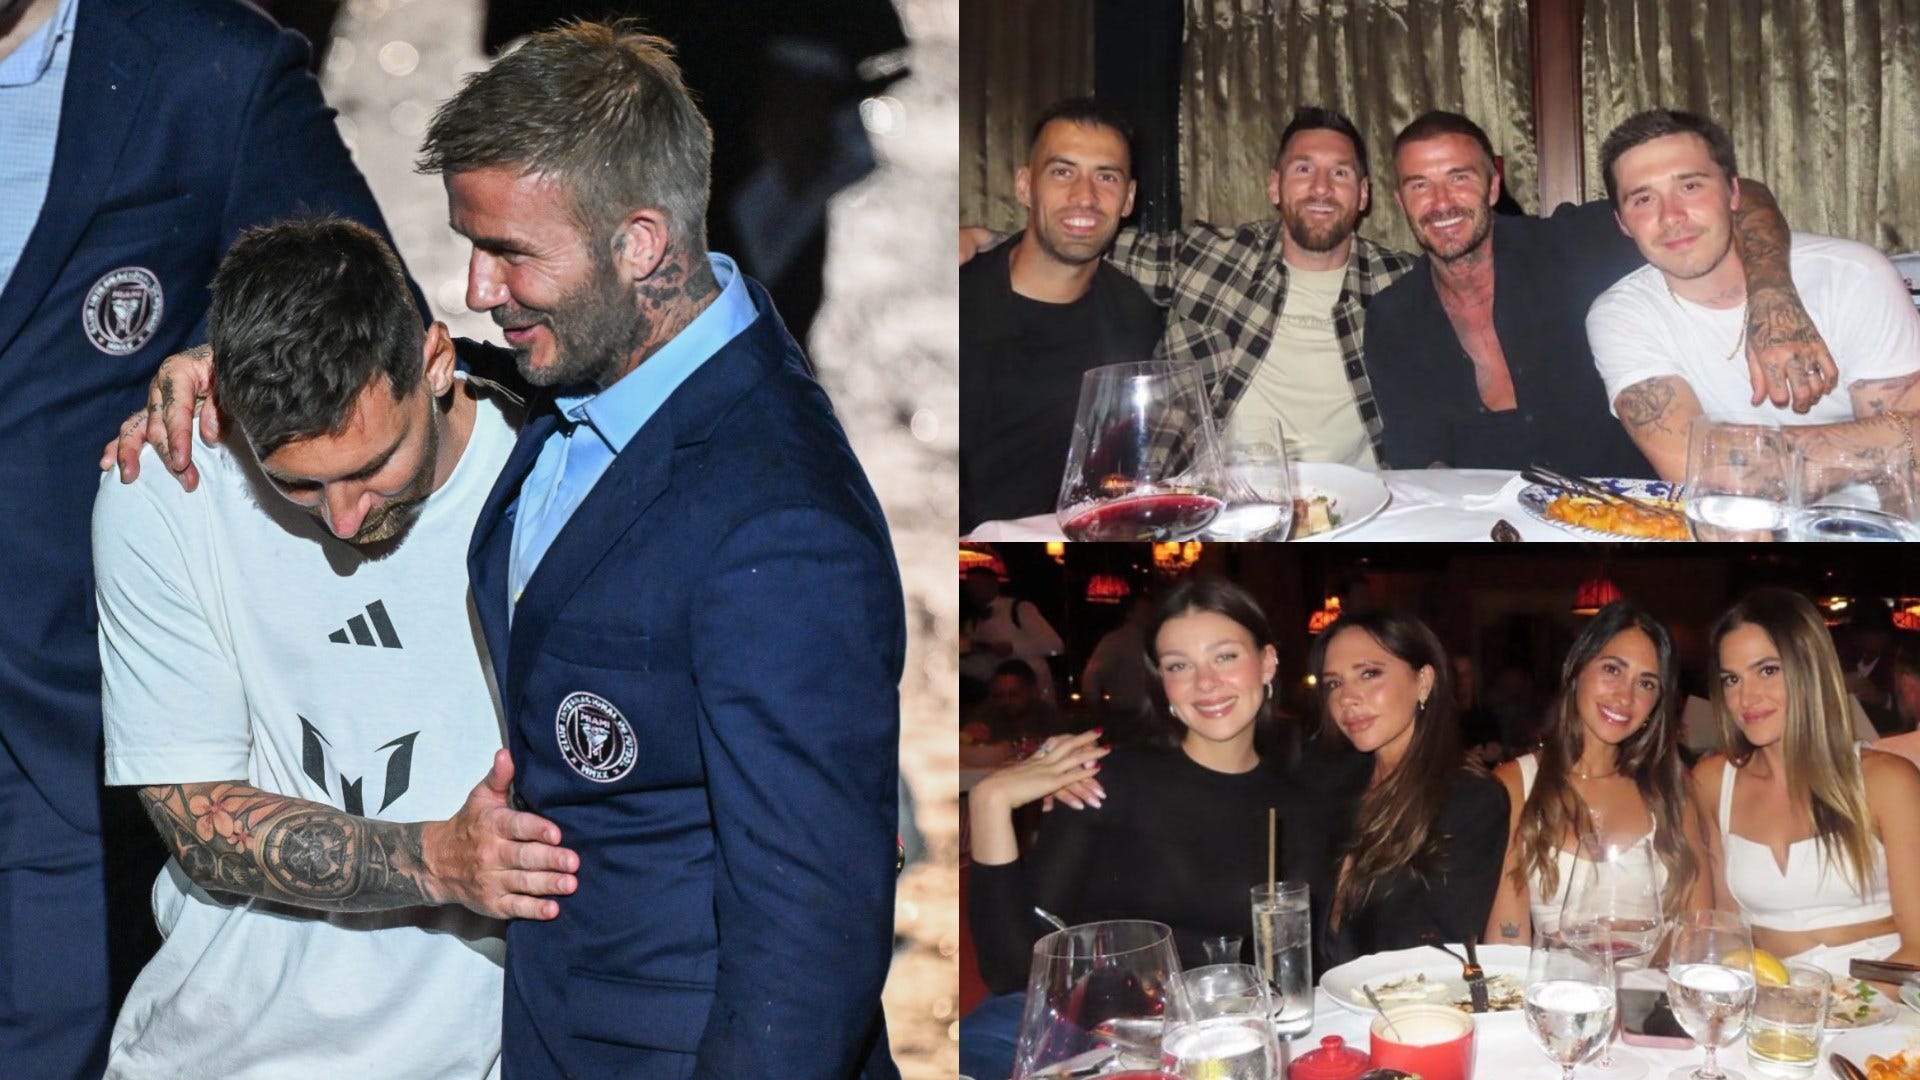 All smiles at star-studded dinner! Inter Miami co-owner David Beckham joined by wife Victoria, Lionel Messi, Antonela Roccuzzo and Sergio Busquets for celebratory meal out in Miami | Goal.com US